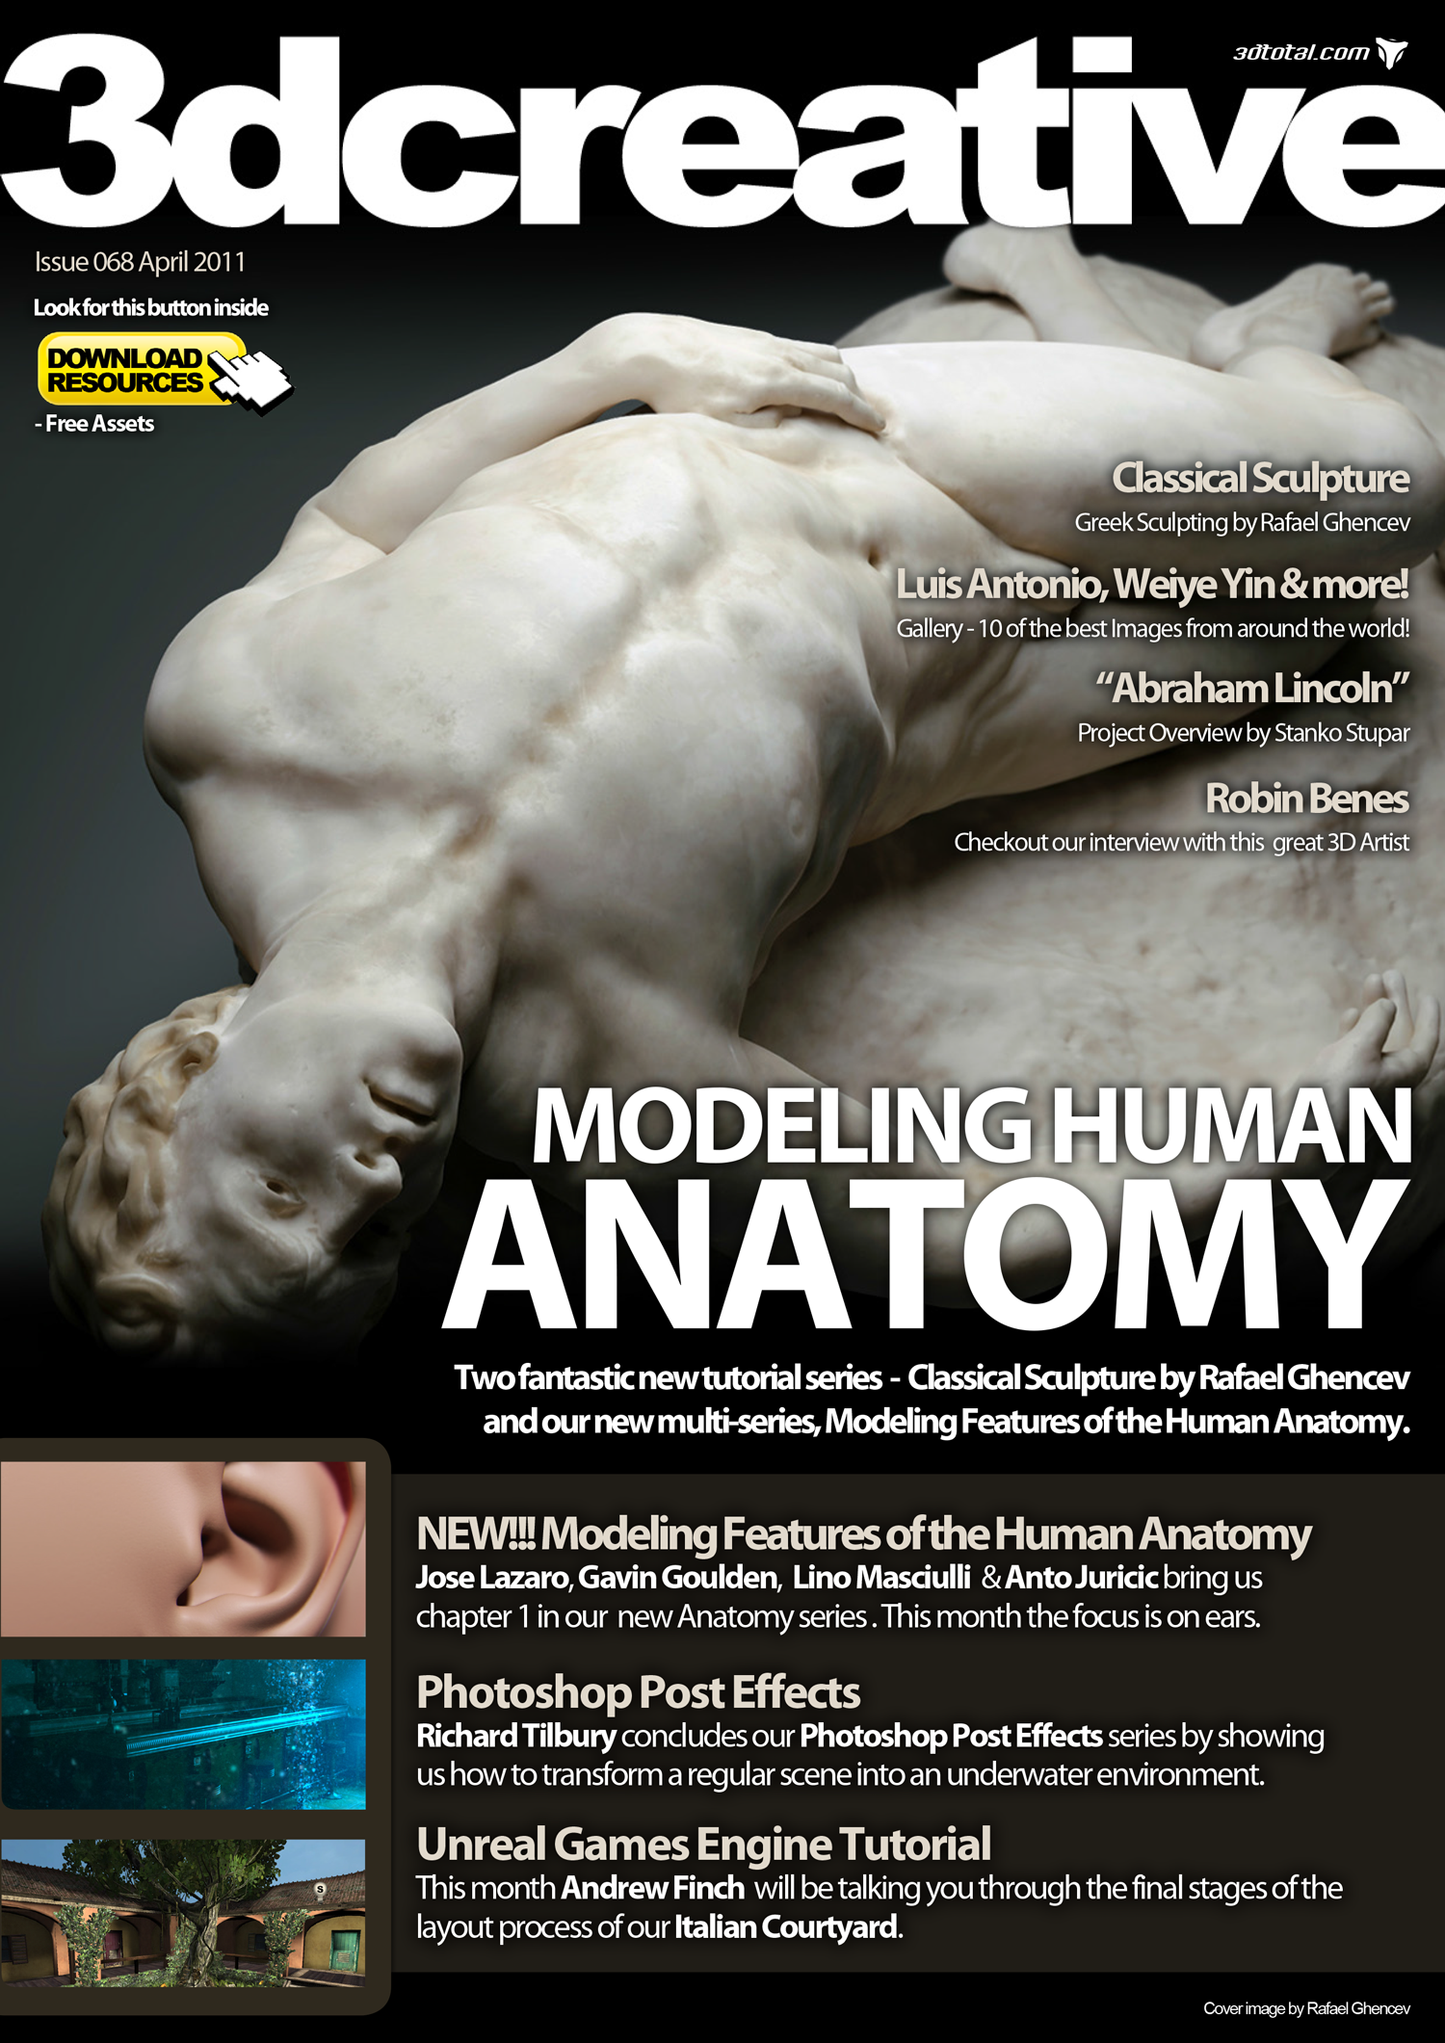 3DCreative: Issue 068 - April2011 (Download Only)